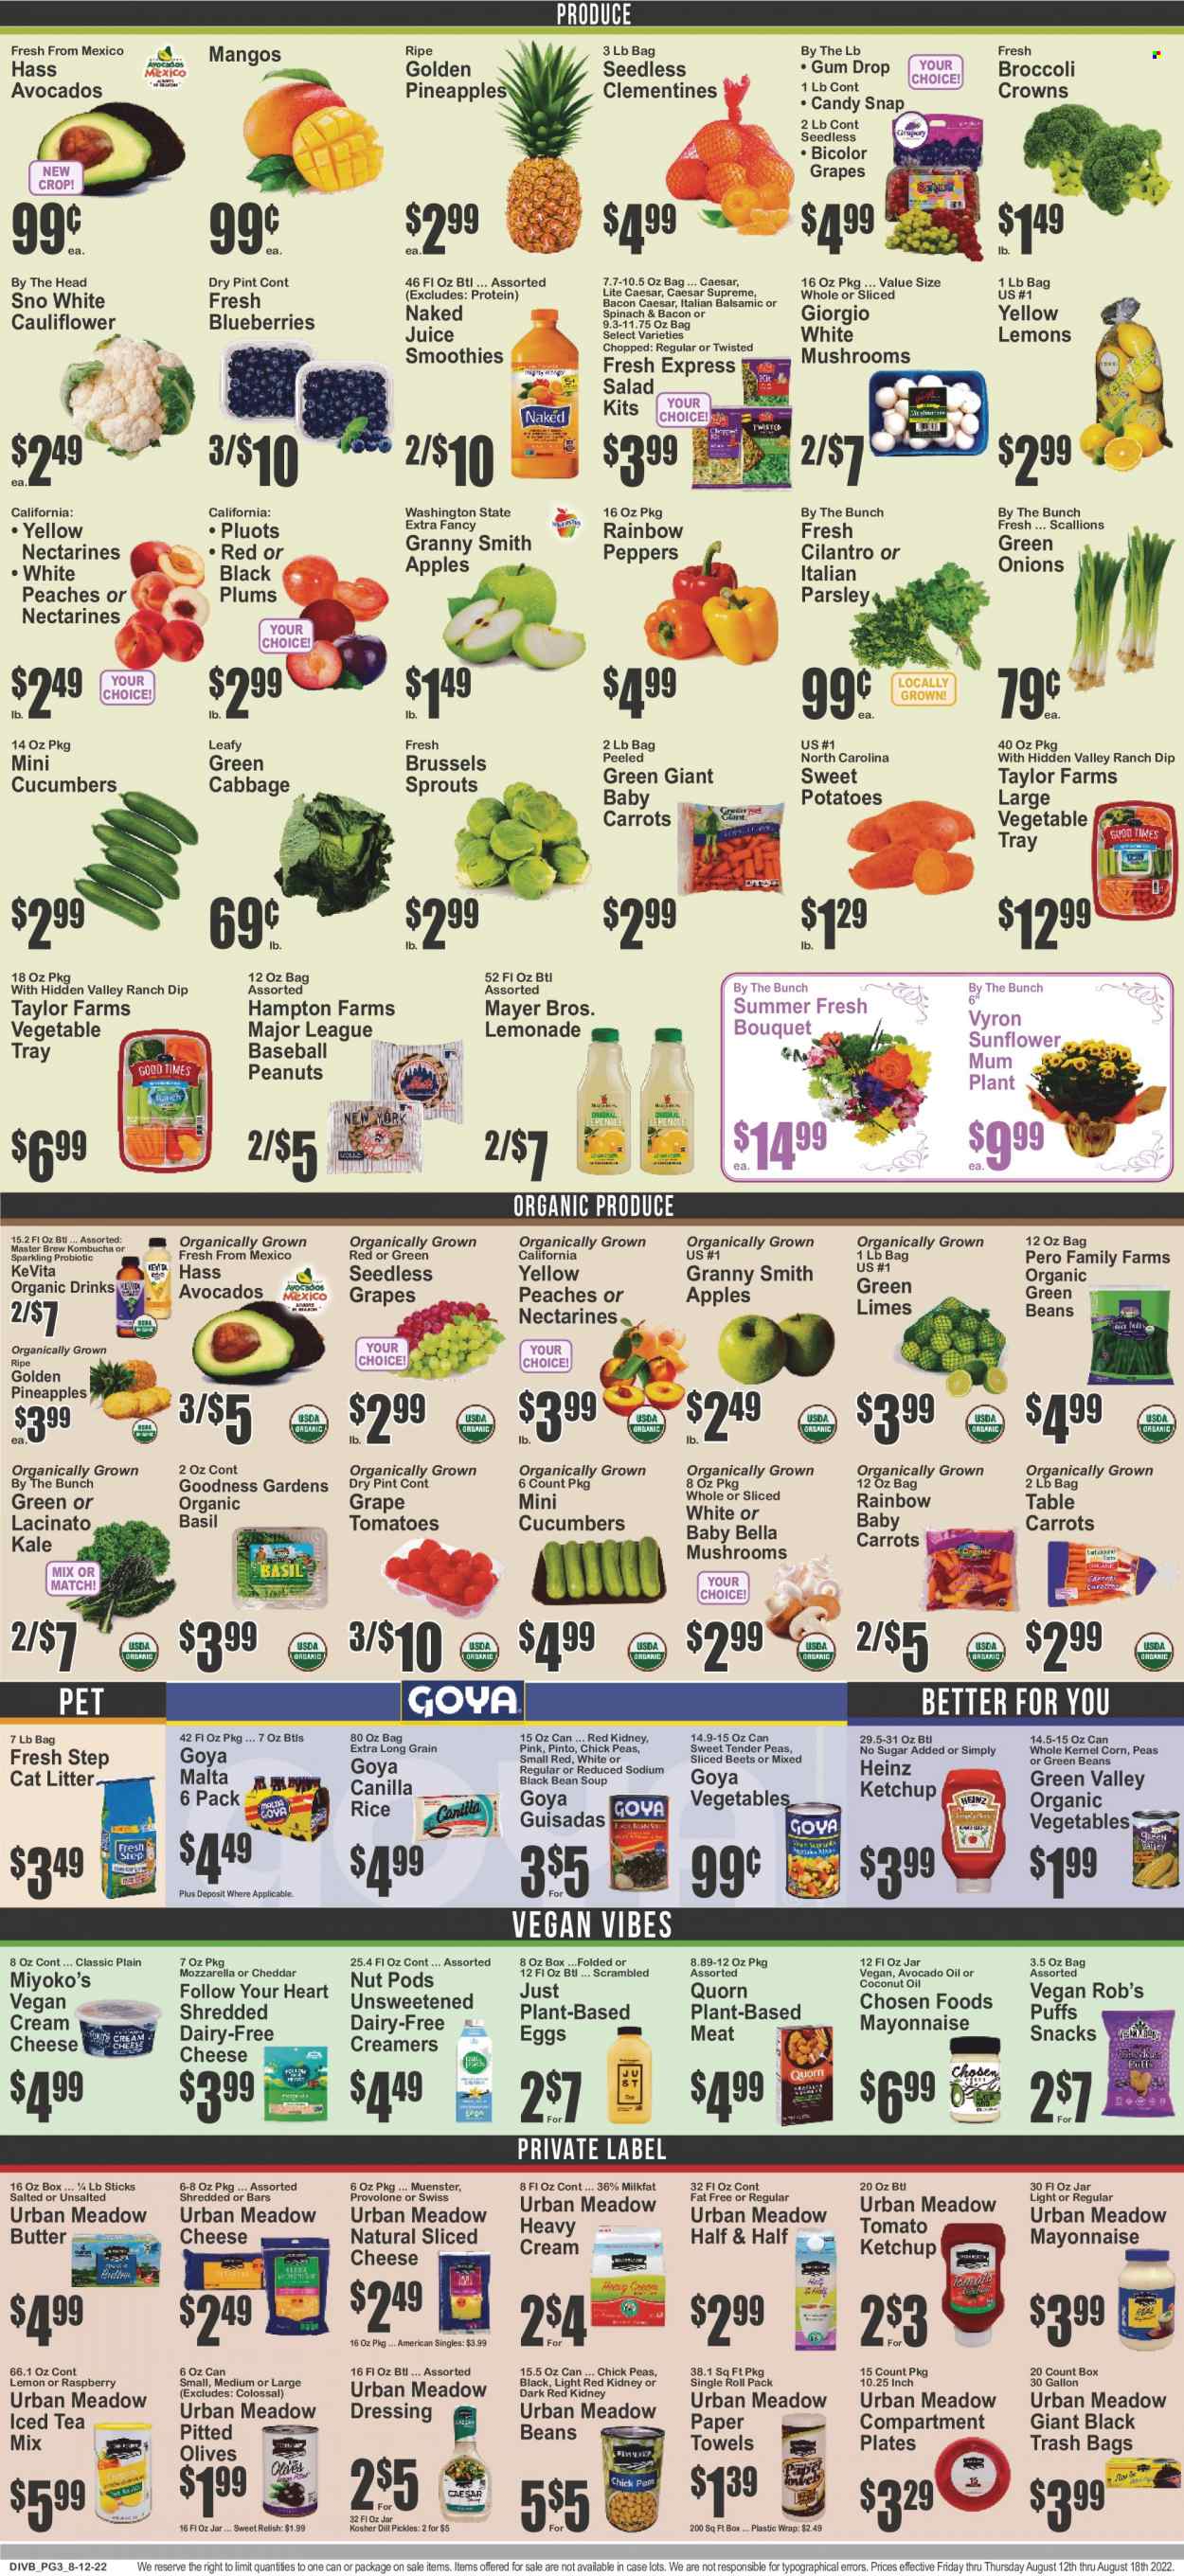 thumbnail - Food Universe Flyer - 08/12/2022 - 08/18/2022 - Sales products - mushrooms, puffs, beans, cabbage, carrots, corn, cucumber, green beans, sweet potato, tomatoes, kale, potatoes, parsley, salad, peppers, brussel sprouts, apples, limes, seedless grapes, pineapple, plums, Granny Smith, soup, cream cheese, mozzarella, sliced cheese, Münster cheese, Provolone, eggs, butter, mayonnaise, dip, snack, Heinz, pickles, olives, Goya, rice, cilantro, dill, ketchup, avocado oil, coconut oil, peanuts, lemonade, juice, ice tea, smoothie, kombucha, KeVita, kitchen towels, paper towels, Mum, trash bags, tray, plate, cat litter, Fresh Step, sunflower, bouquet, clementines, nectarines, Half and half, lemons, black plums, peaches. Page 3.